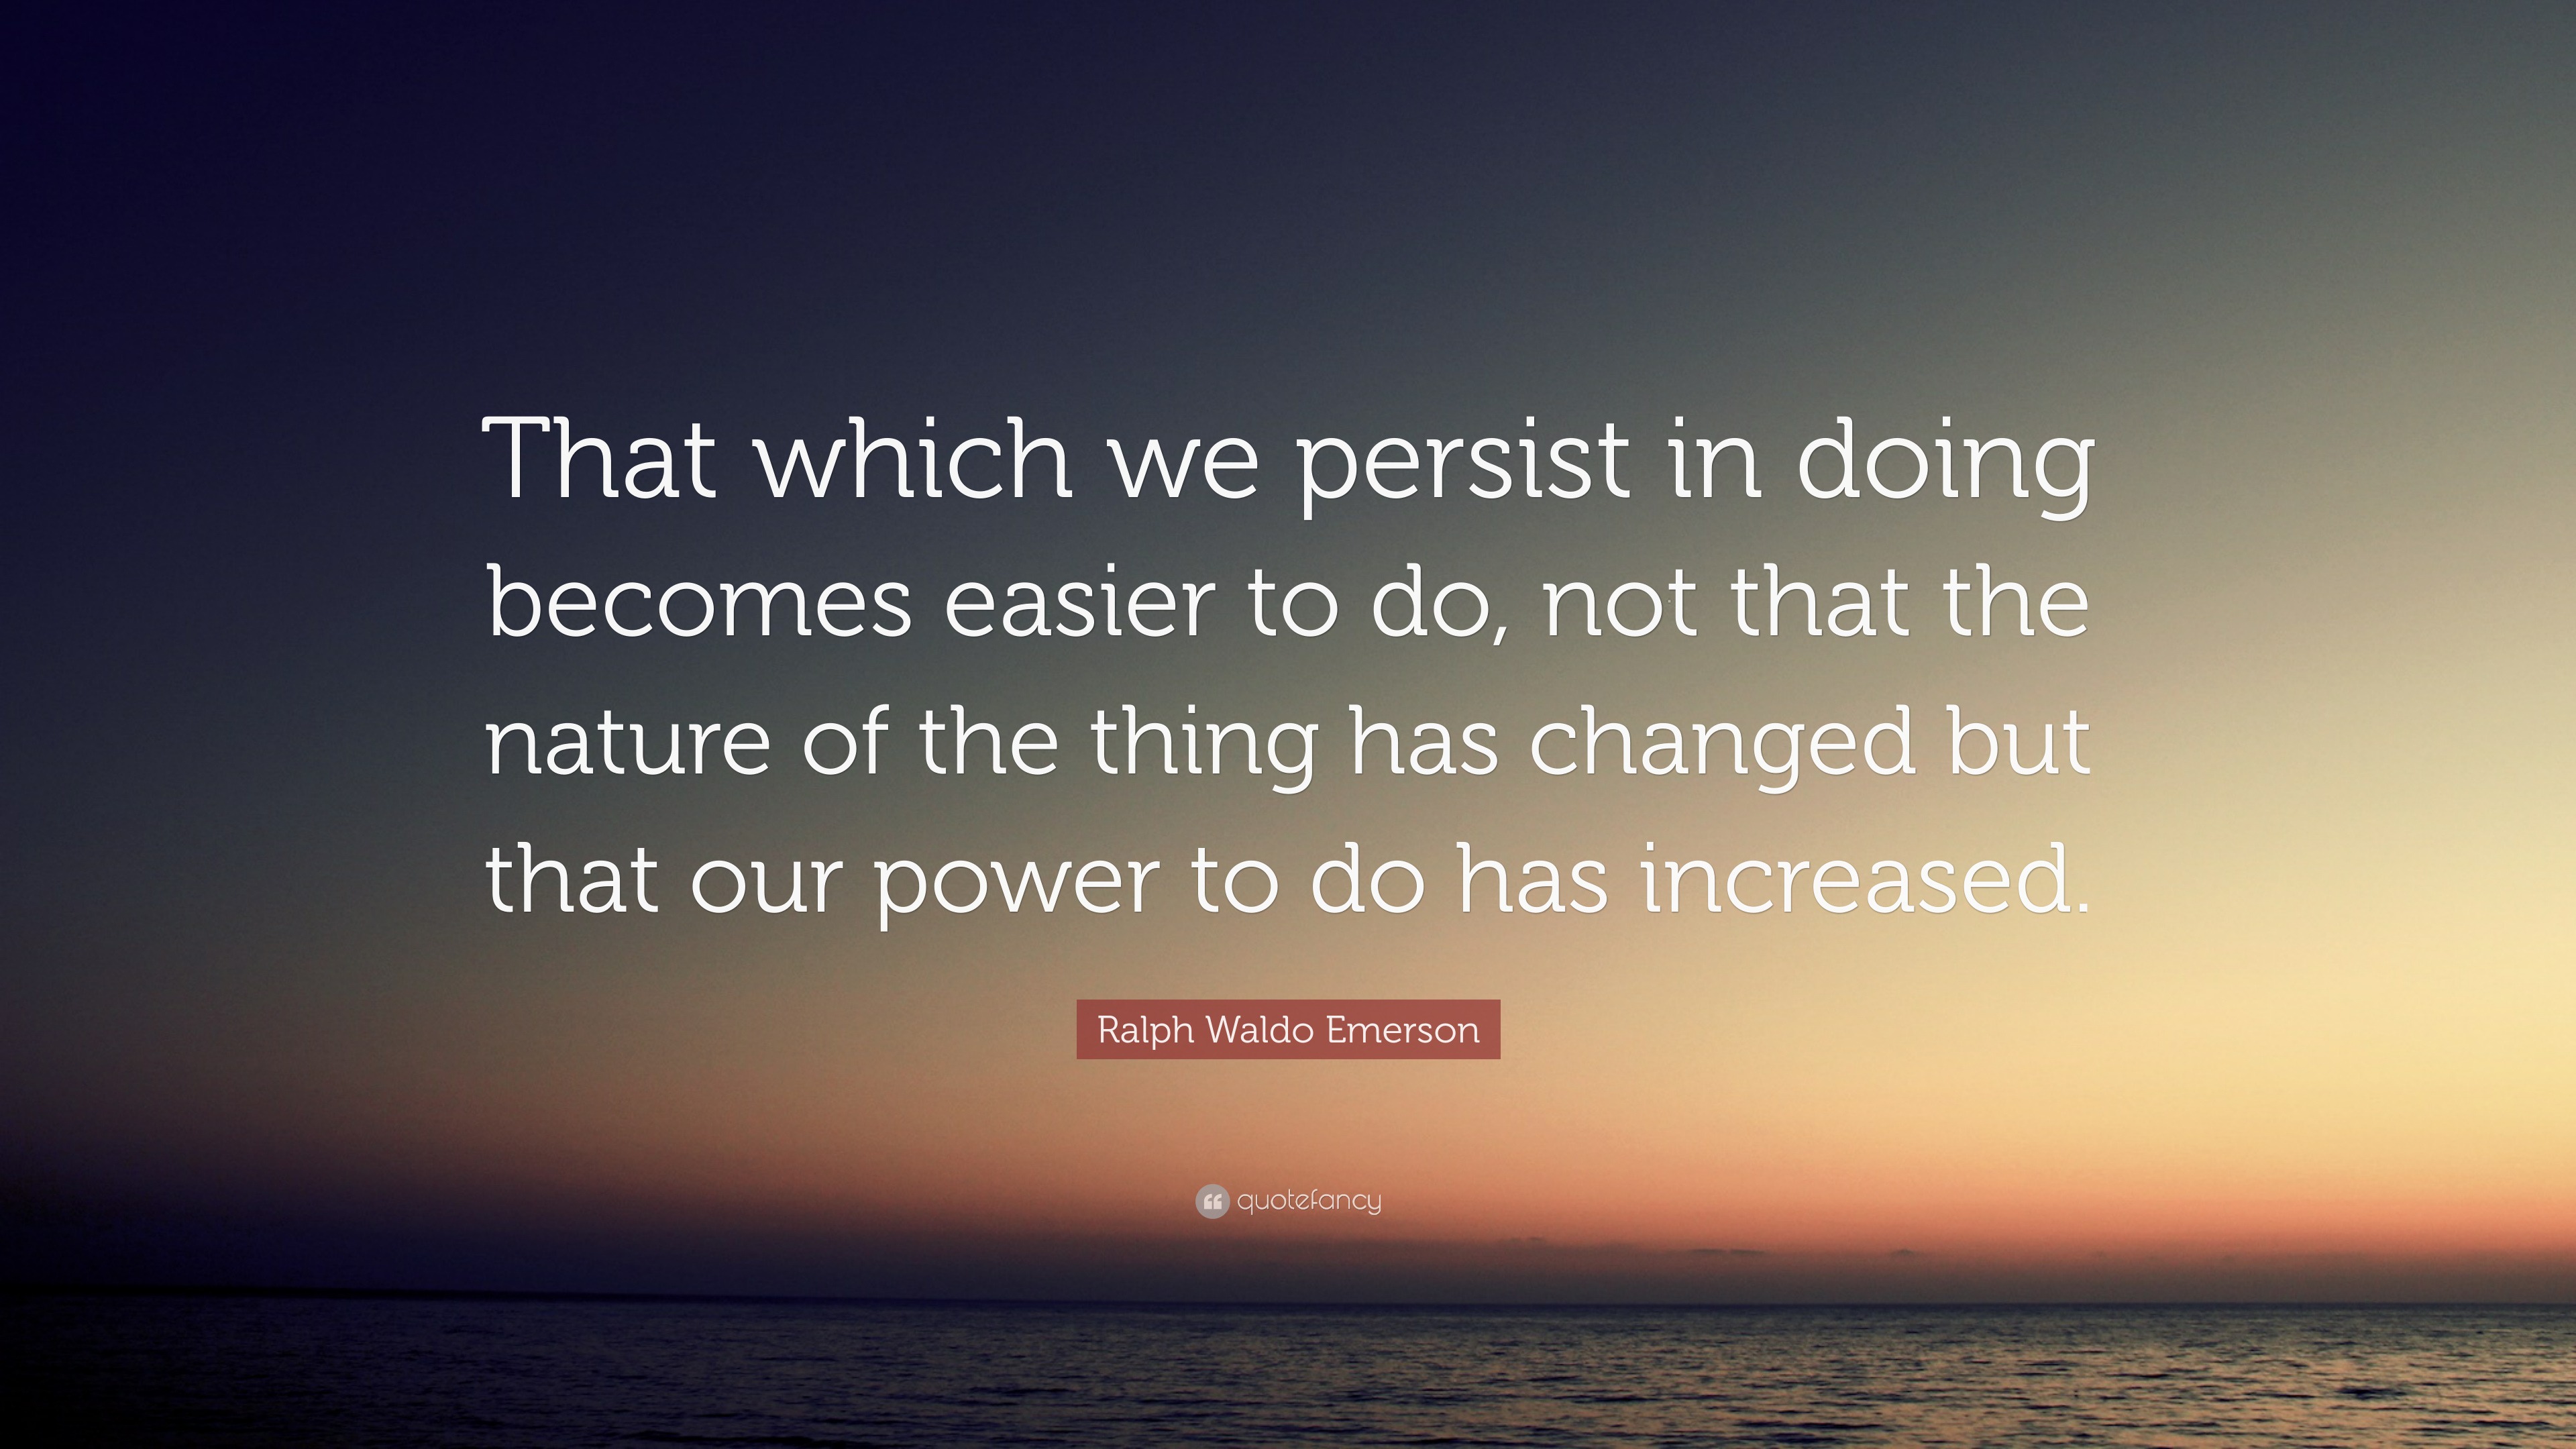 Ralph Waldo Emerson Quote: “That which we persist in doing becomes ...